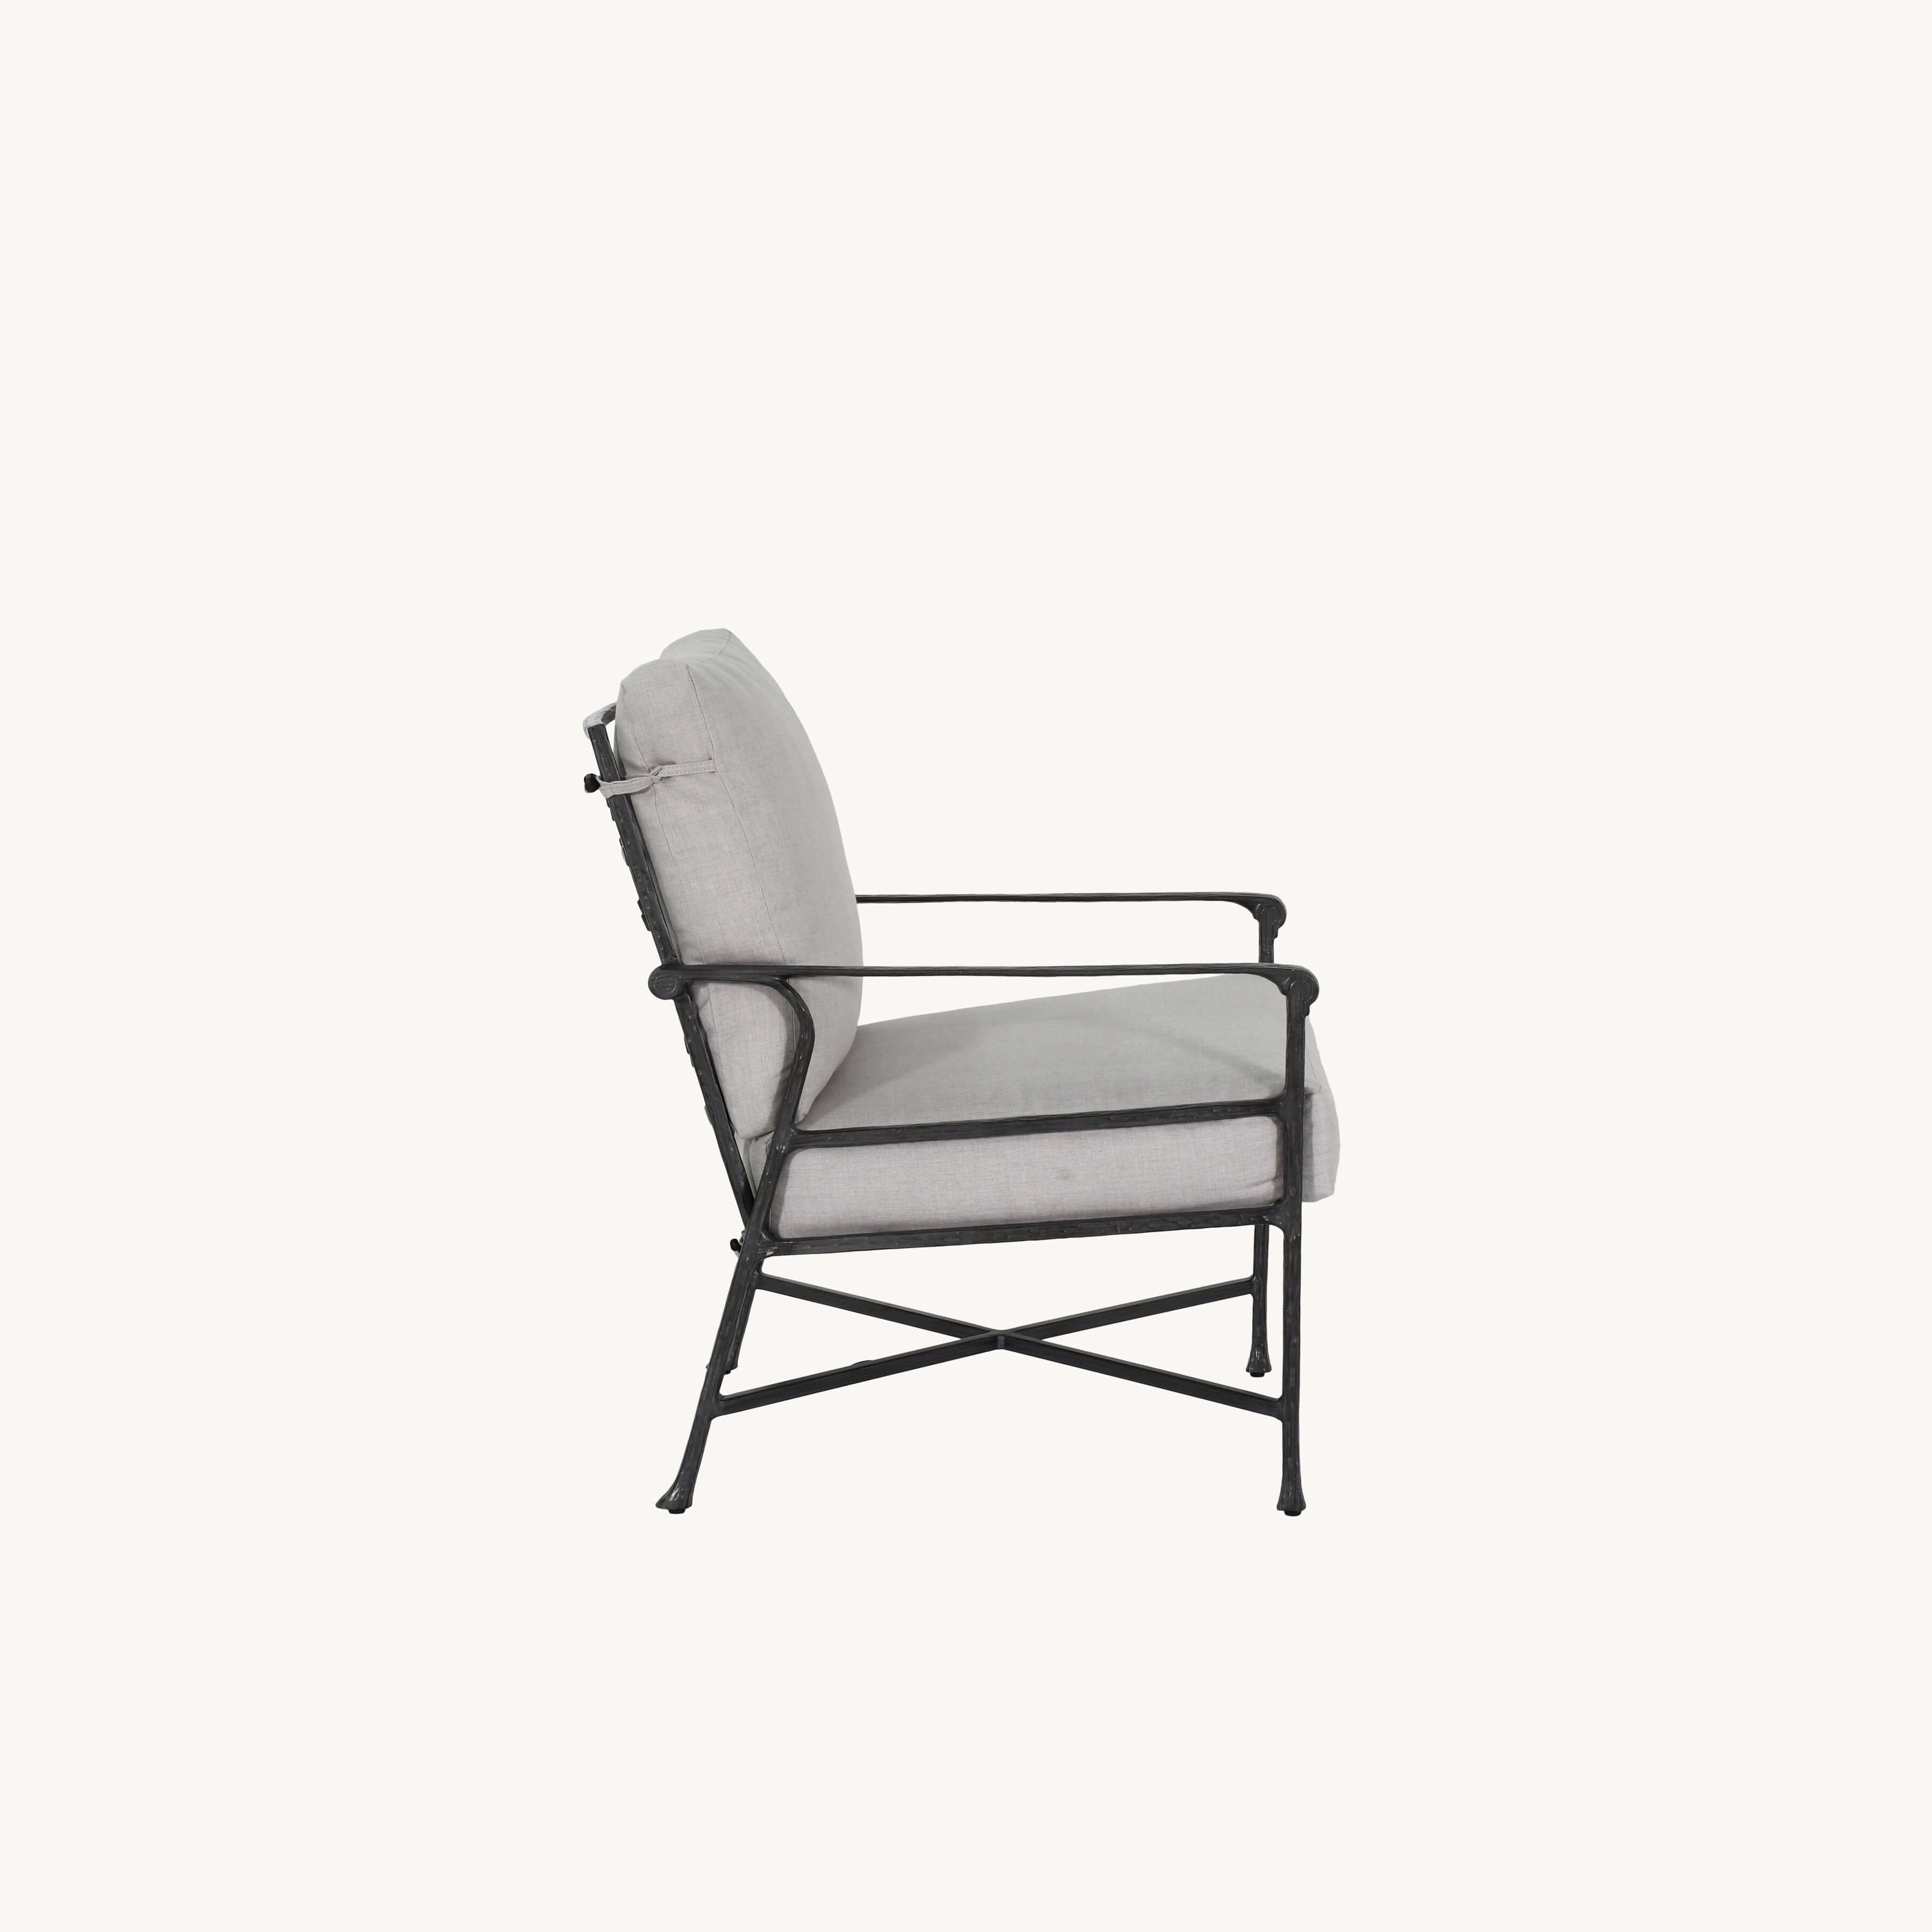 Marquis Cushioned Lounge Chair By Castelle